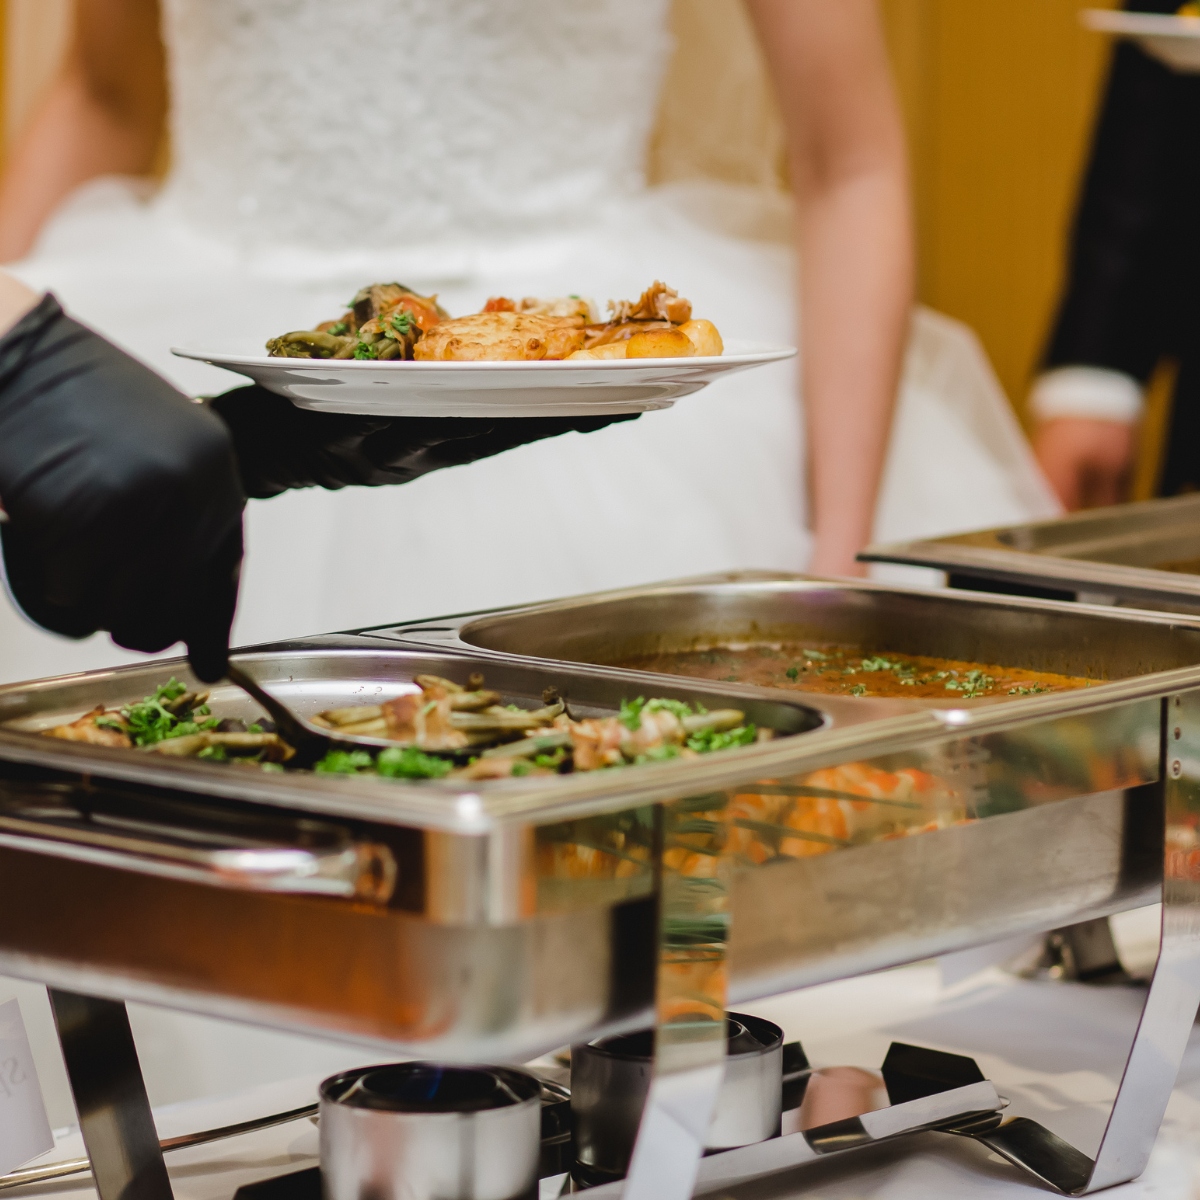 Full Catering Service: Service During the Event